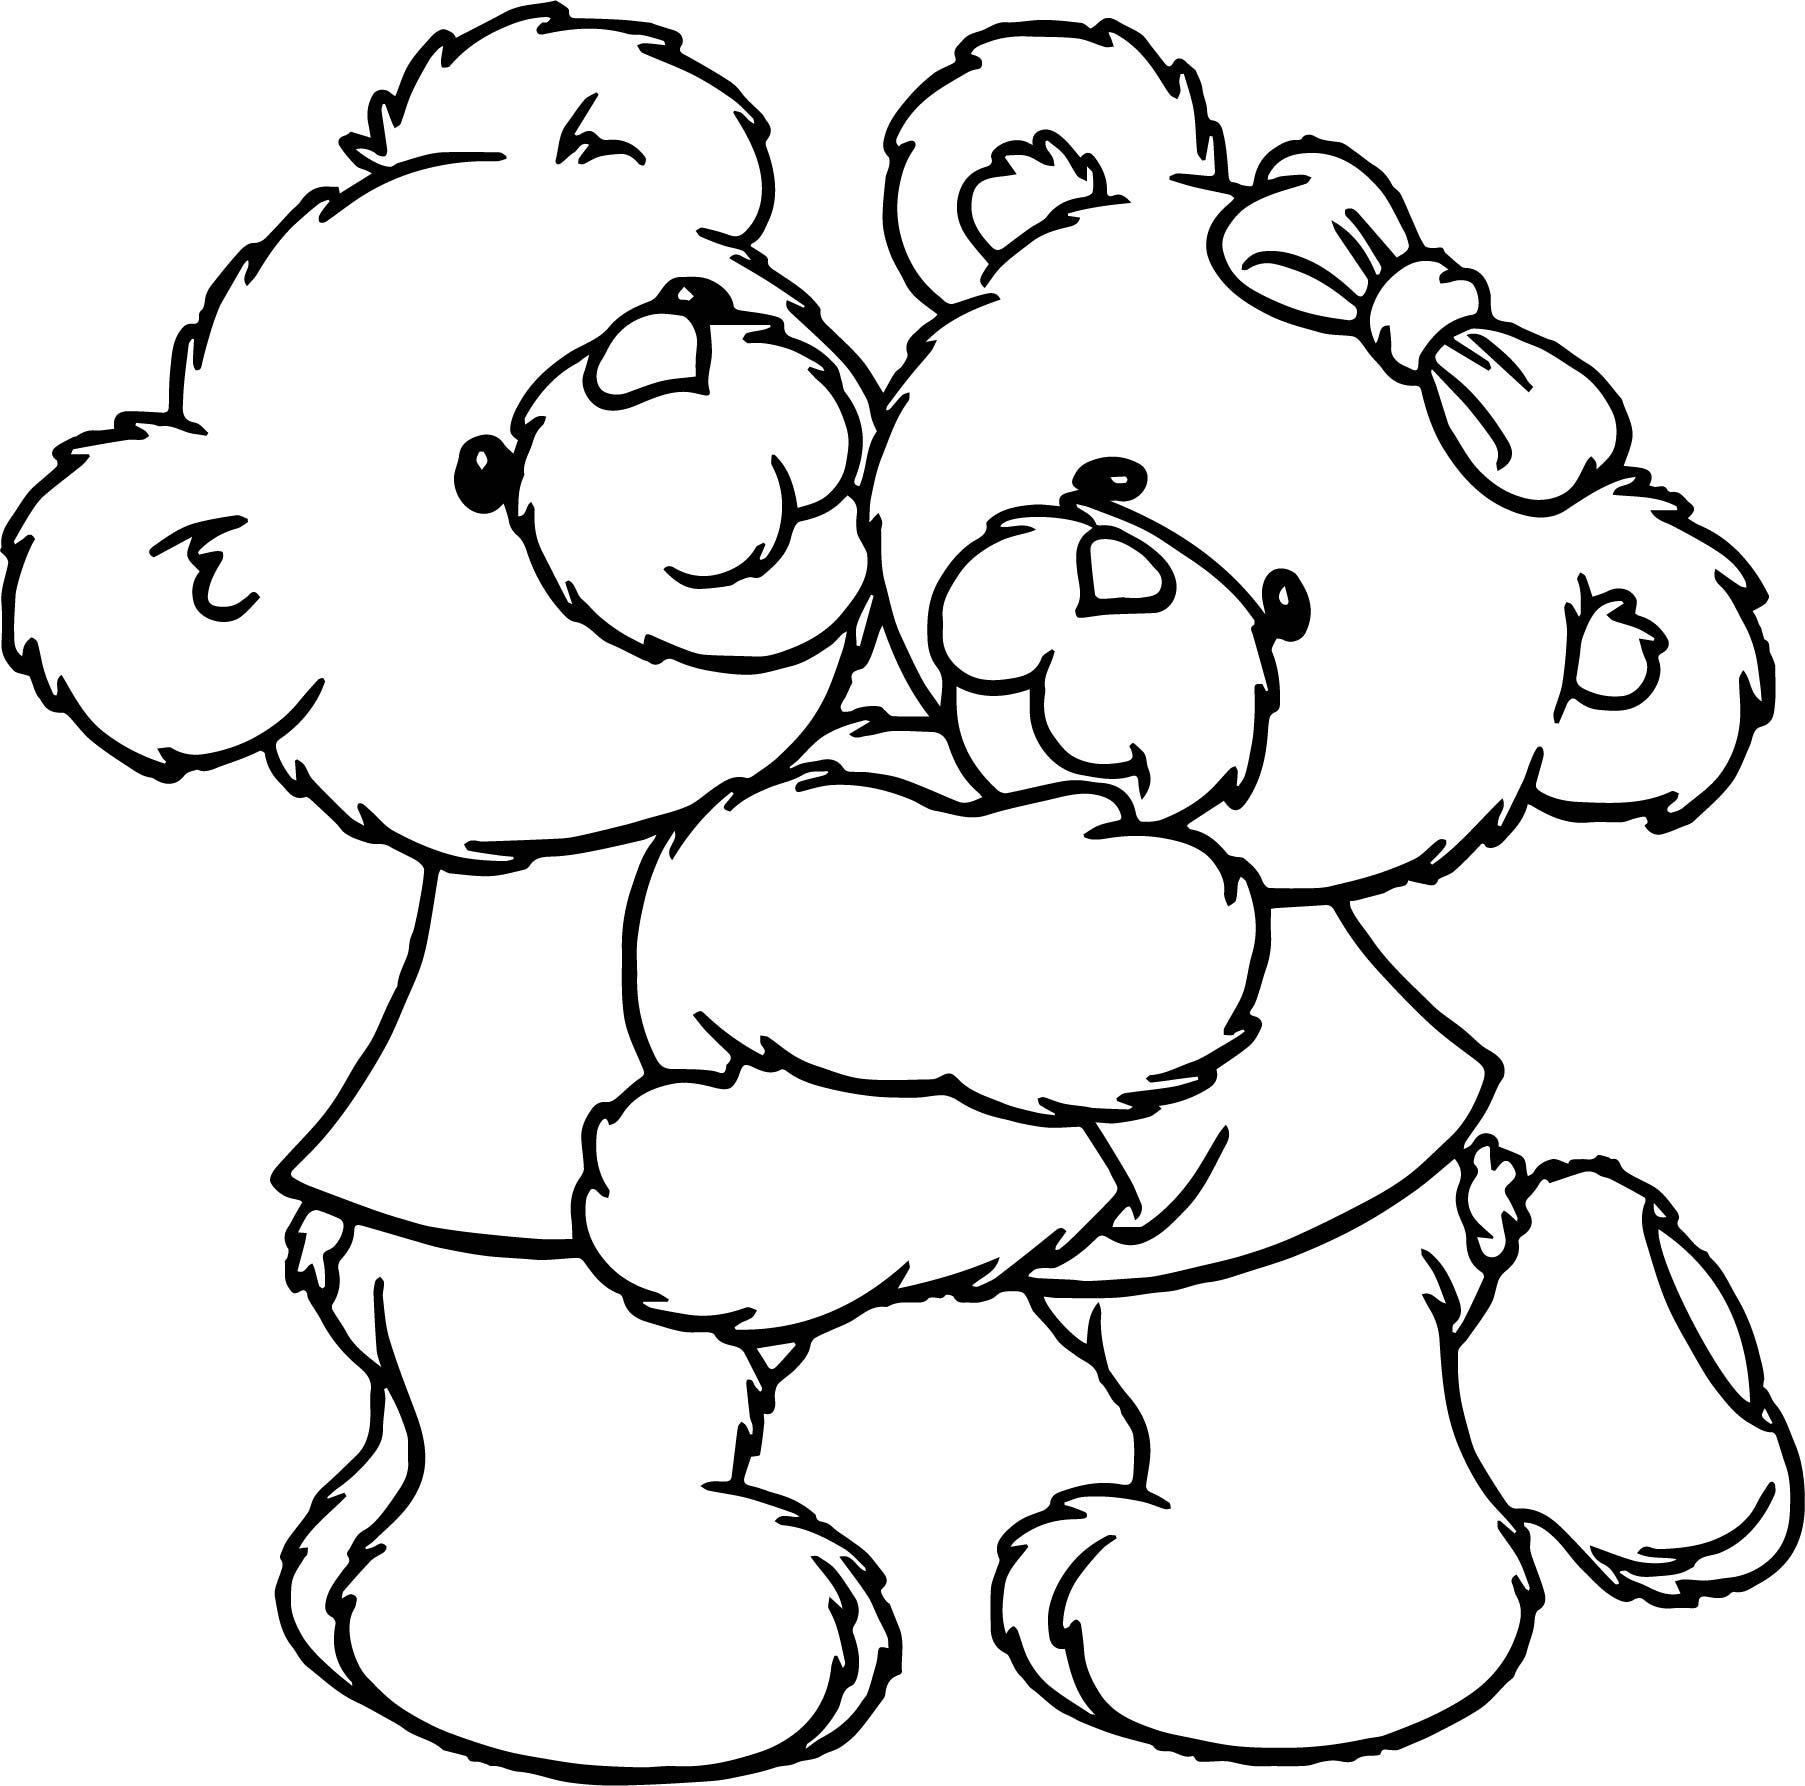 Boy And Girl Hugging Drawing | Free download on ClipArtMag Boy And Girl Hugging Drawing